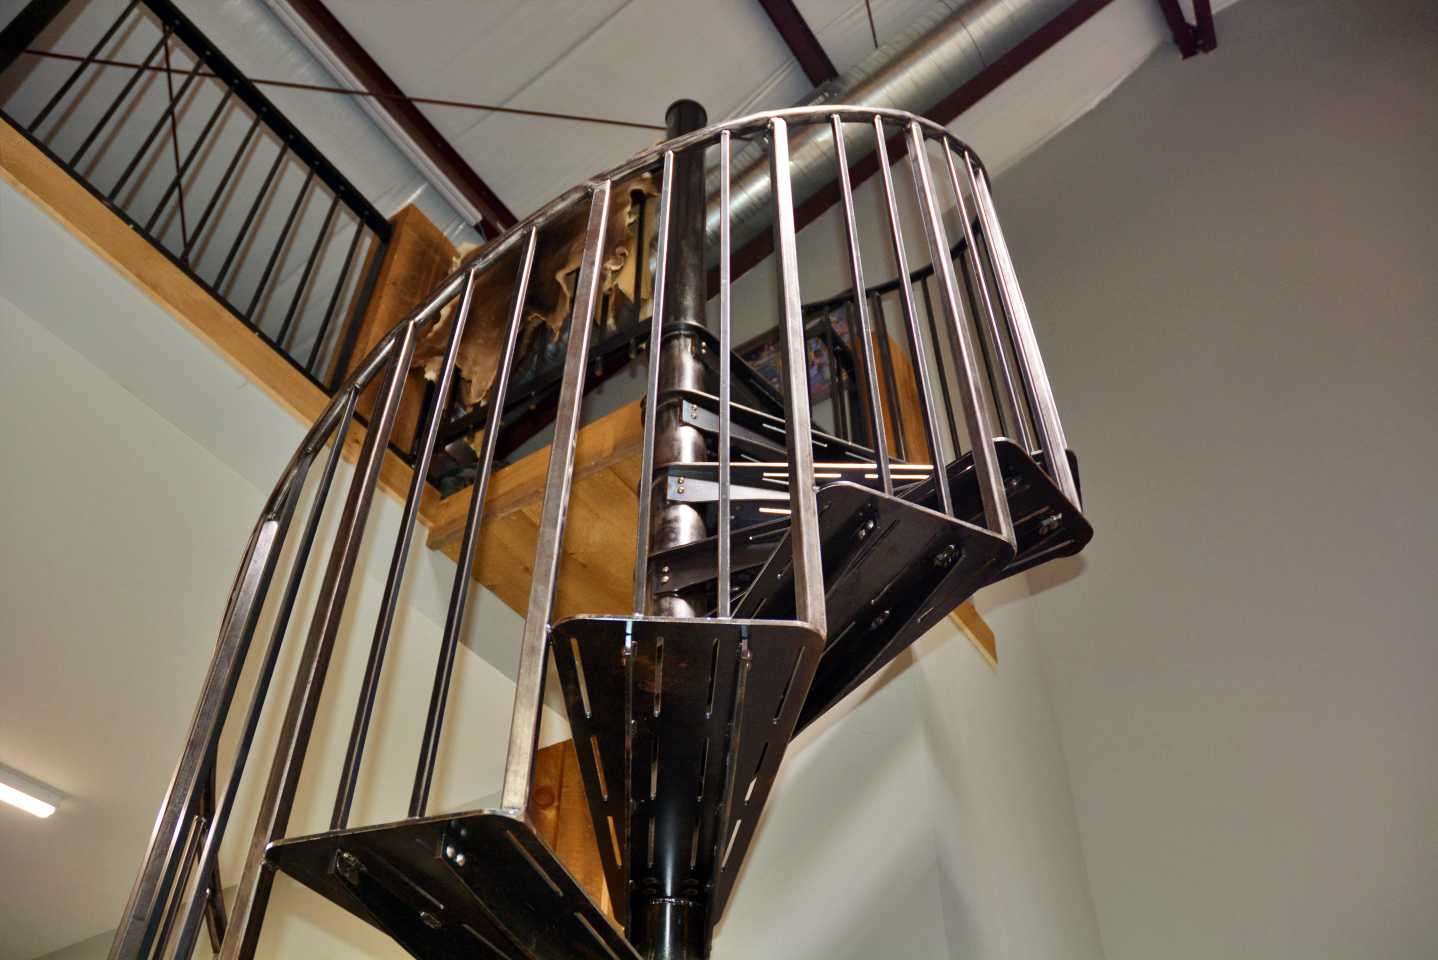 The spiral staircase was made by a childhood friend specializing in metalwork. 